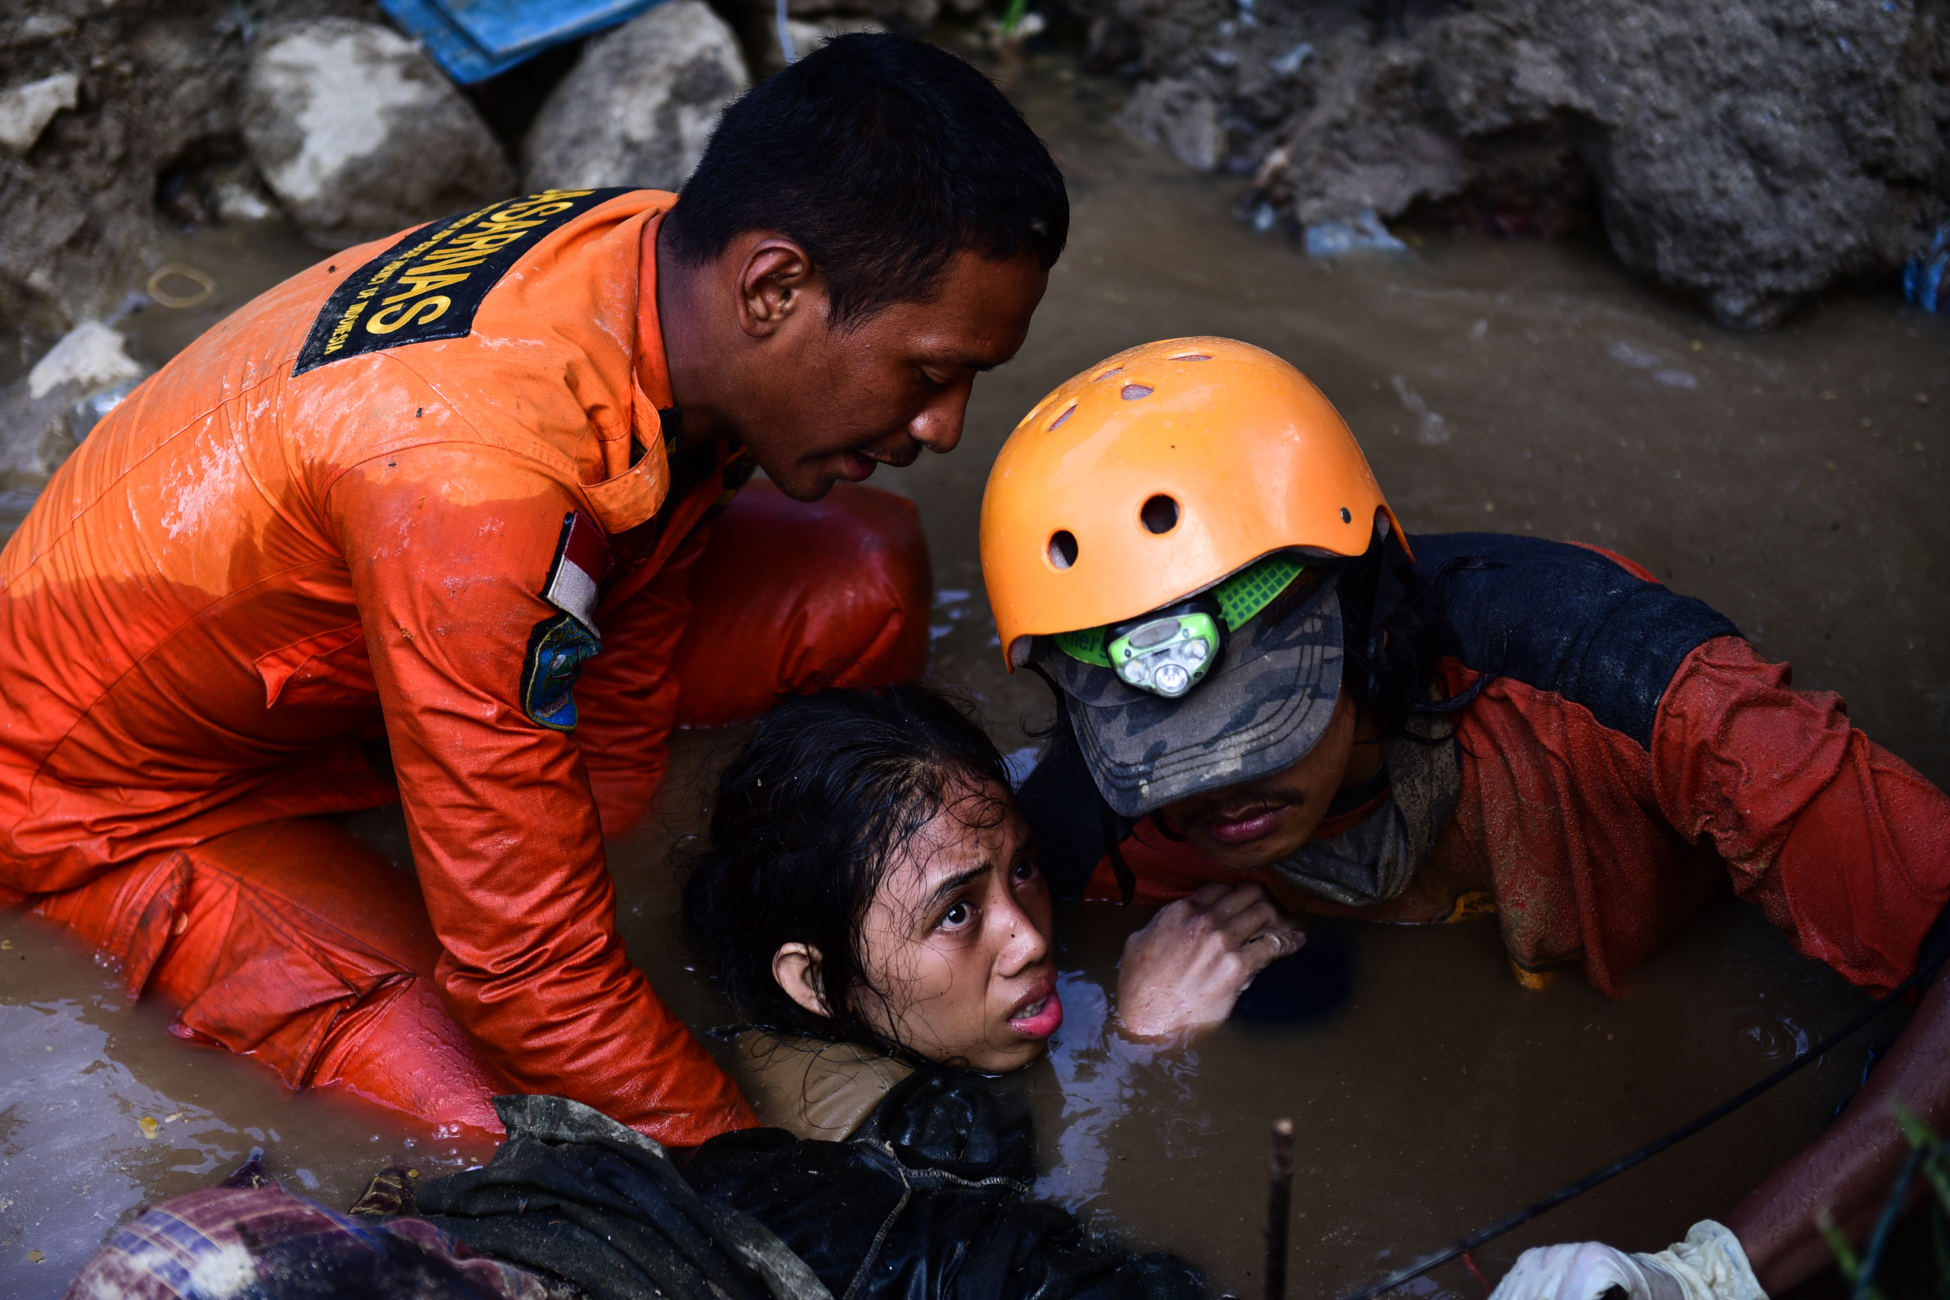 On 30 September 2018 in Indonesia, Nurul Istikhoroh (15) is evacuated by the Basarnas team at the Balaroa National Park in West Palu, Central Sulawesi, after almost 48 hours of being trapped in the rubble of their house and being submerged in water after the earthquake and tsunami that struck Sulawesi on September 28. © Unicef/Wilander